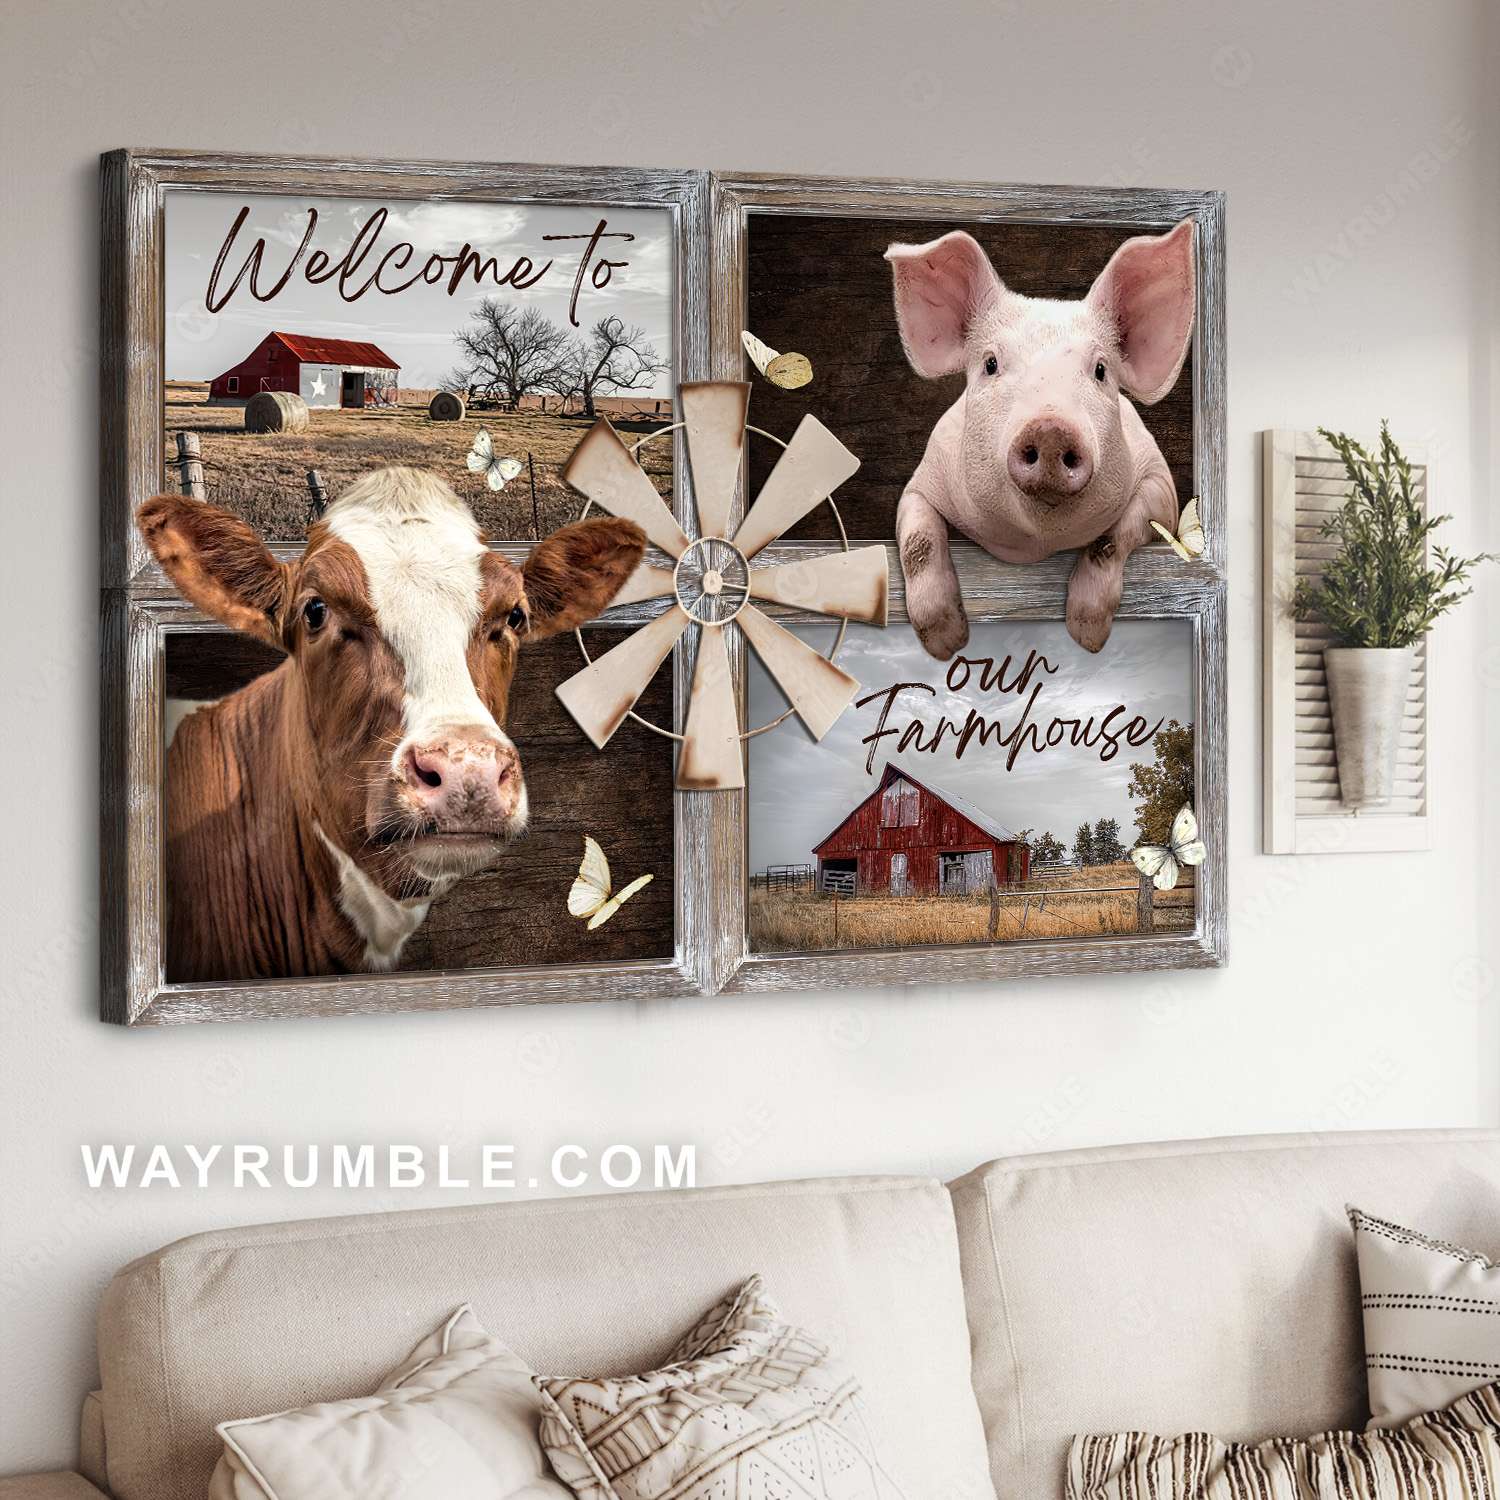 Simmental cow, Pig drawing, Old windmill, Welcome to our farmhouse - Jesus Landscape Canvas Prints, Christian Wall Art